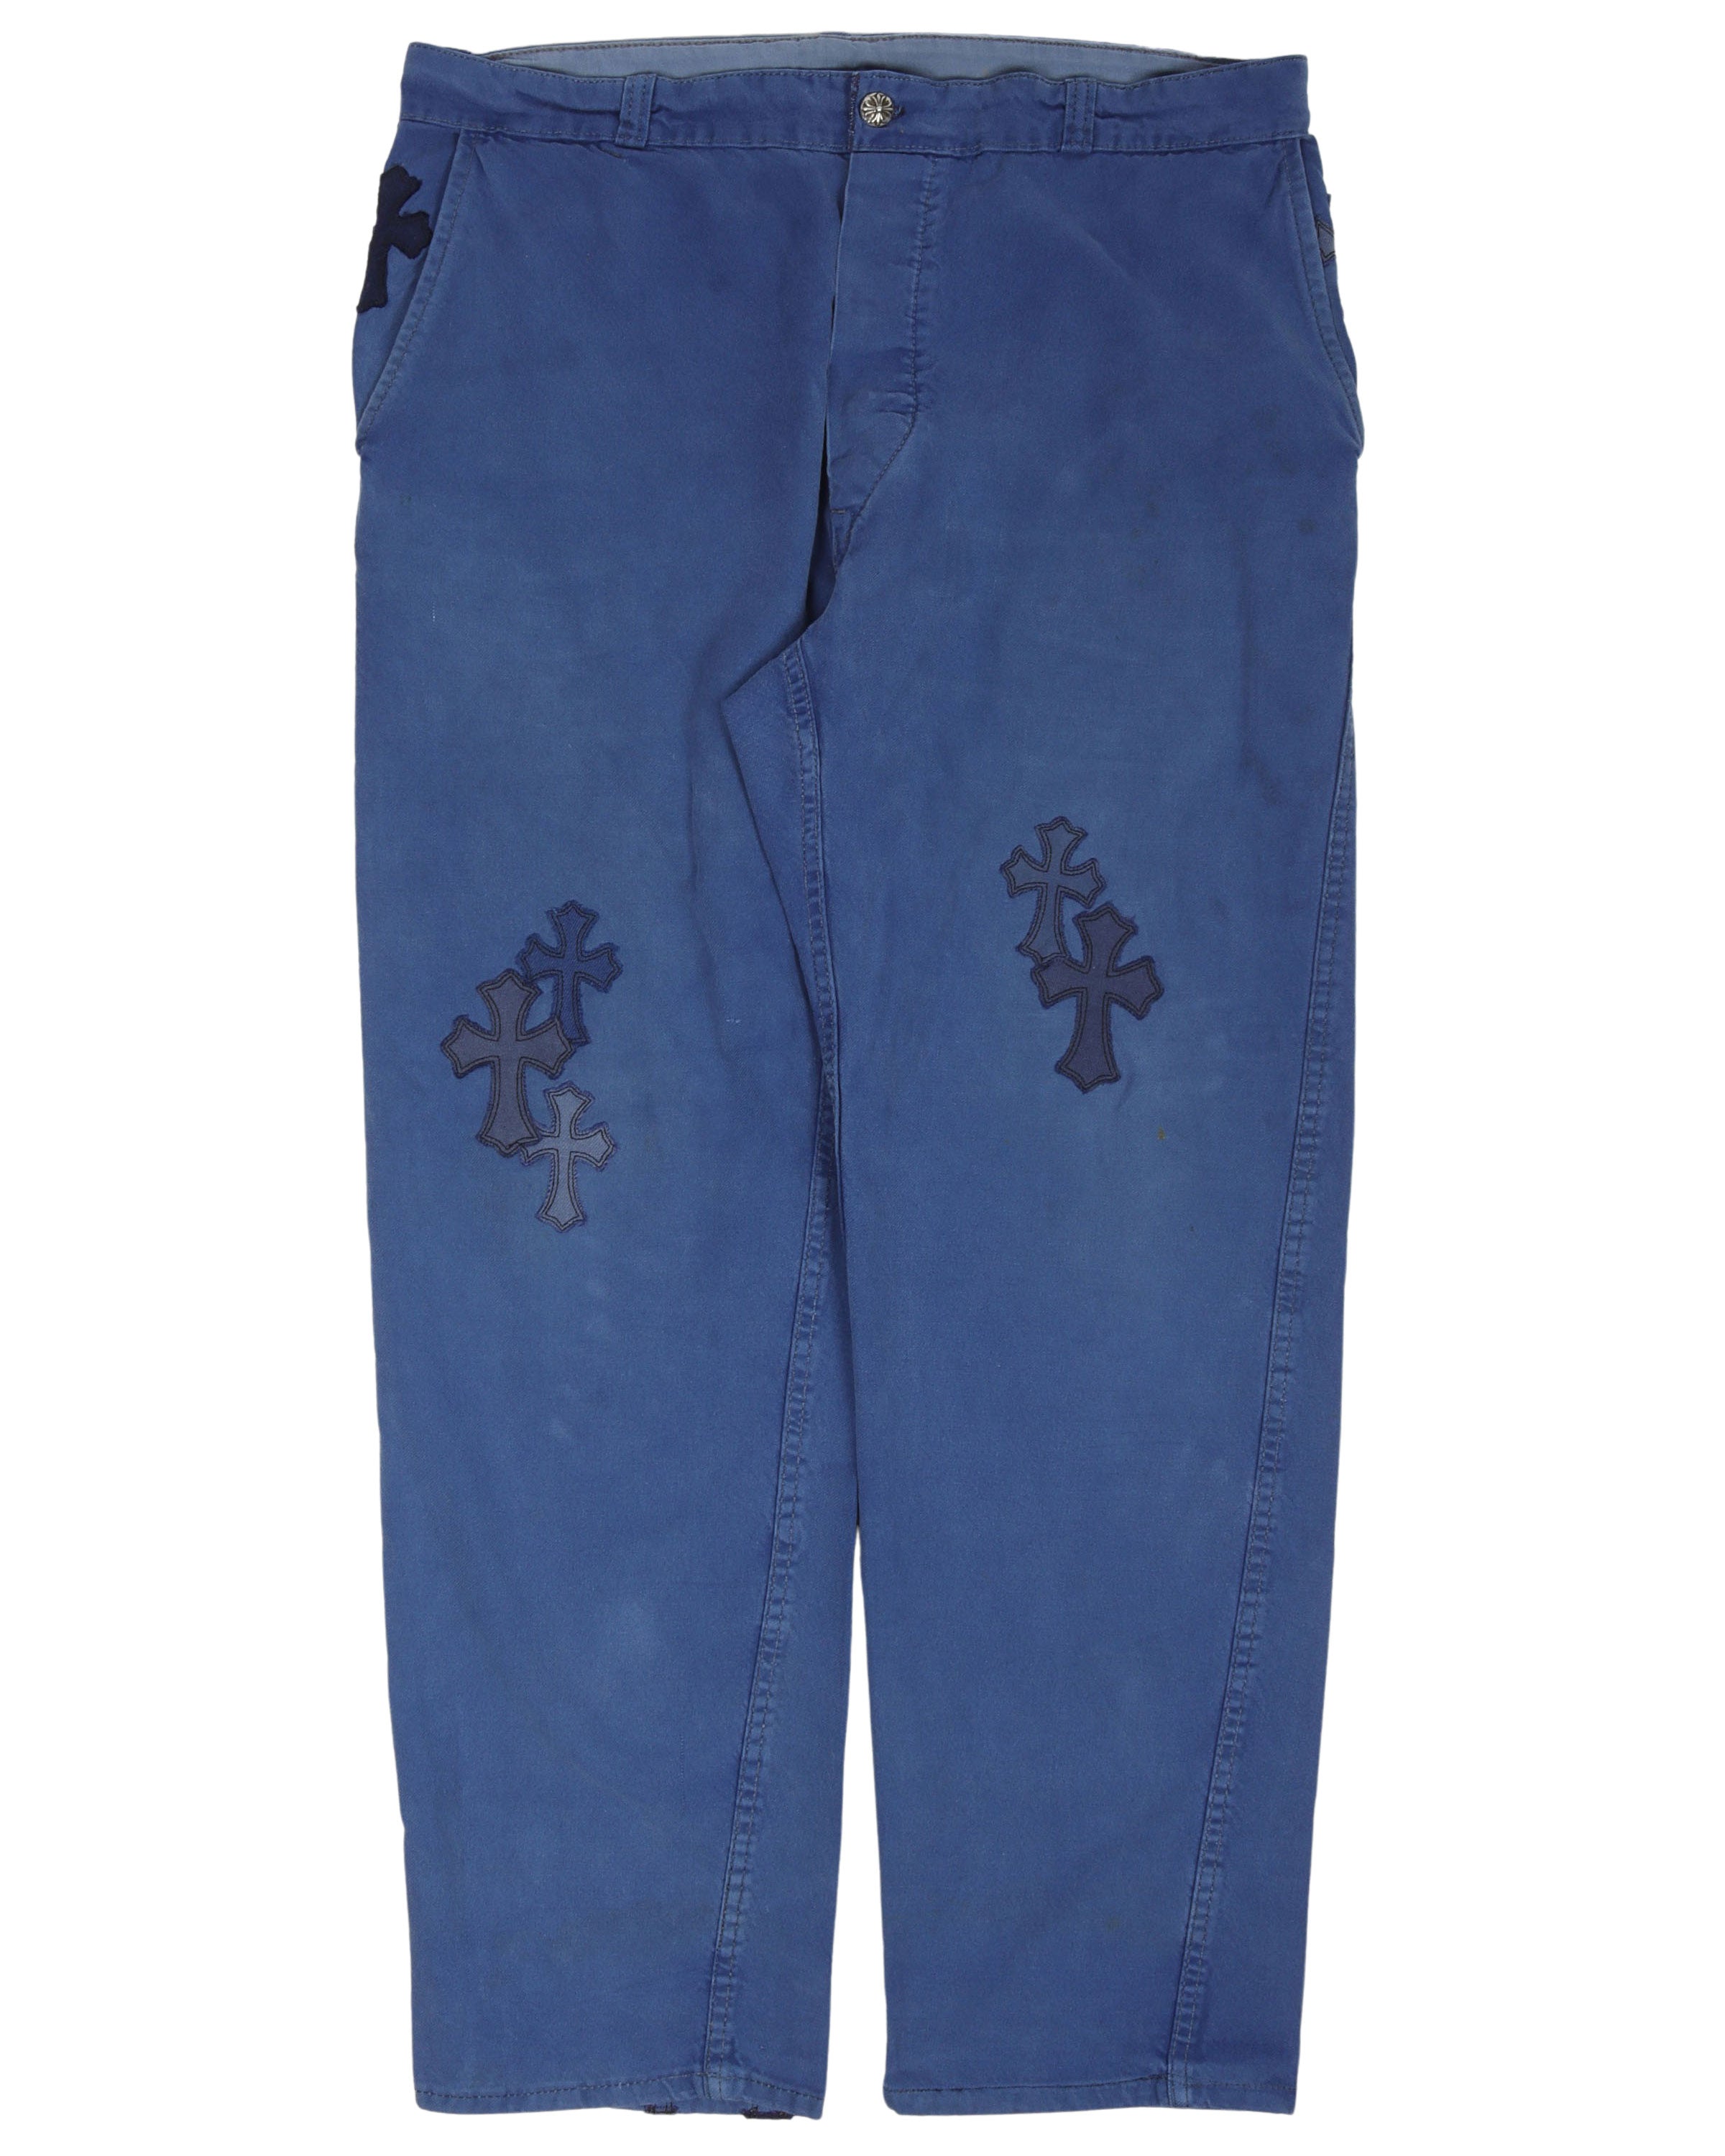 Cross Patch French Work Pants